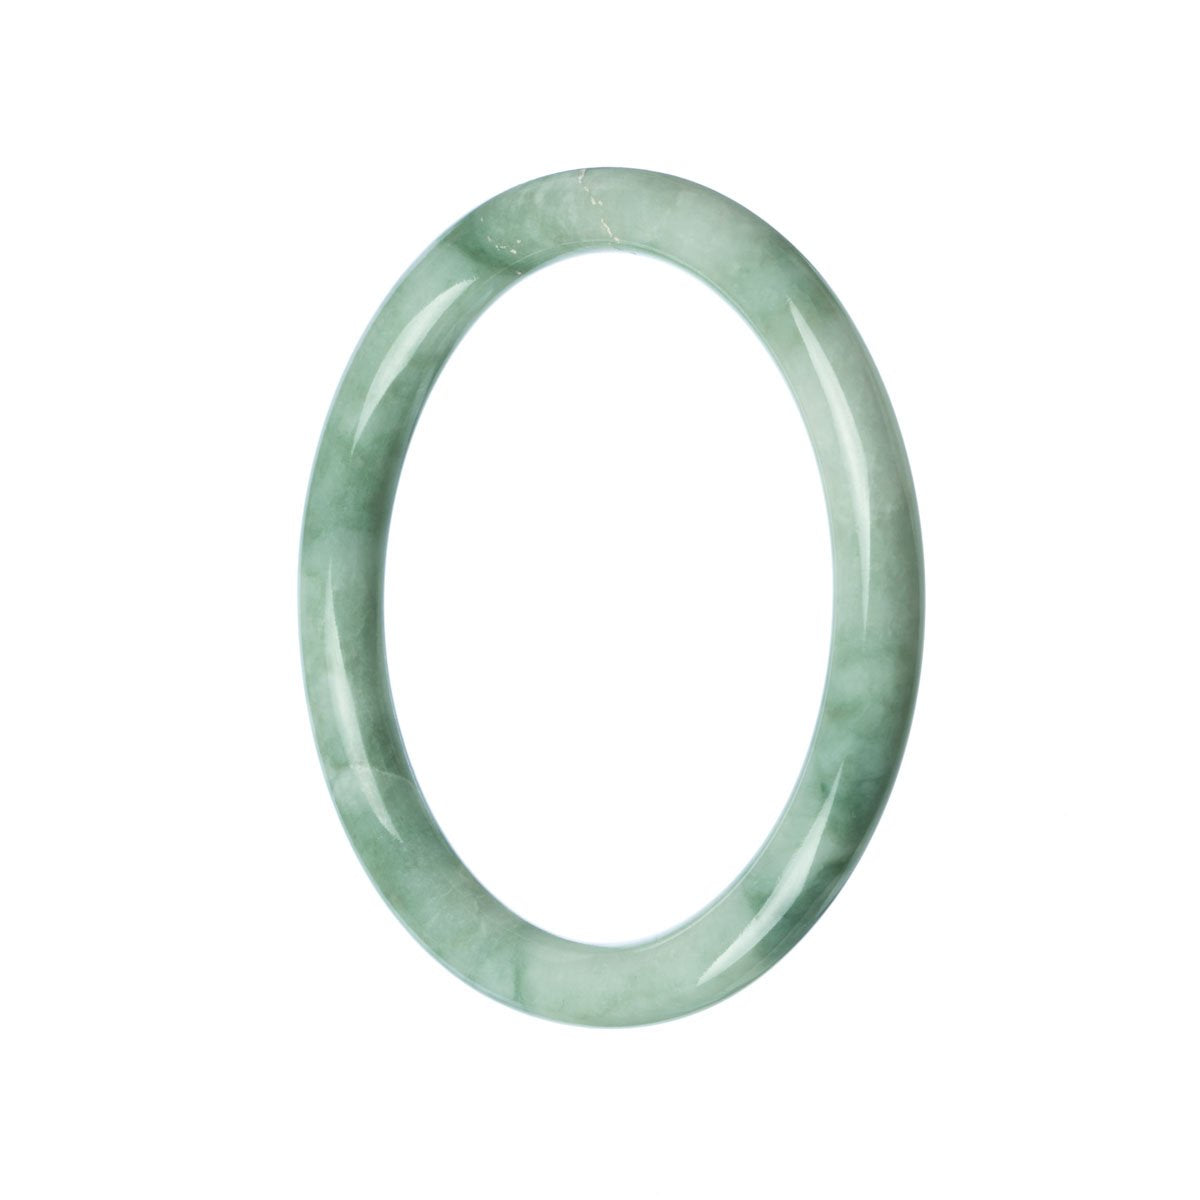 A small round green jade bangle from Burma, untreated and authentic.